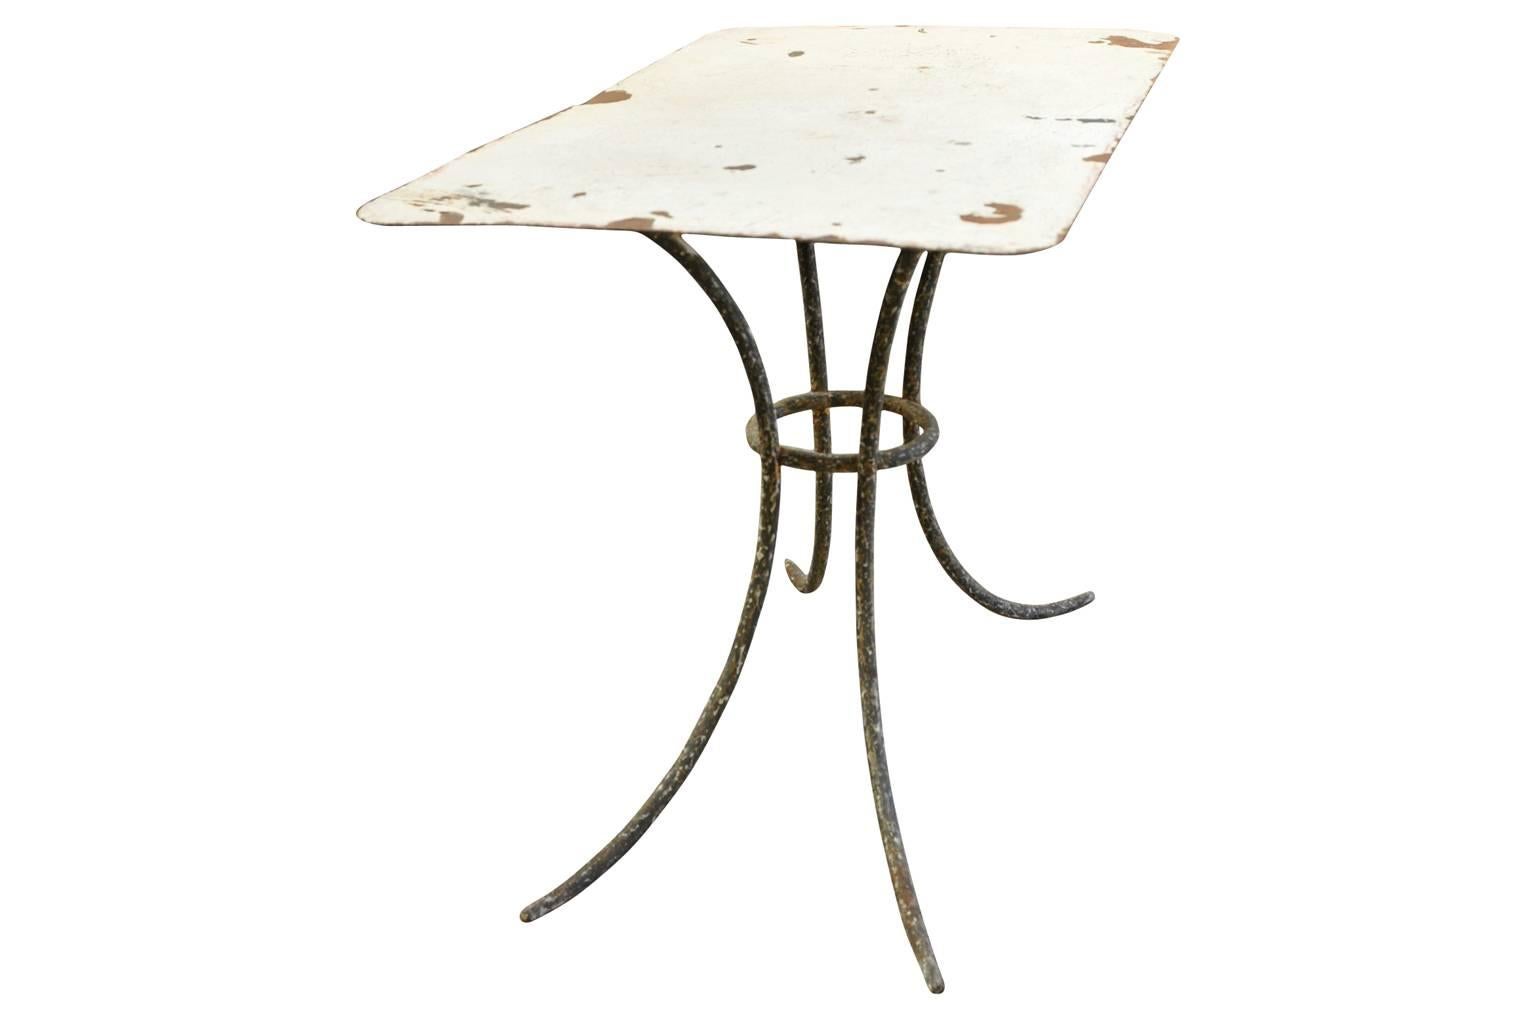 Painted French Early 20th Century Garden Table